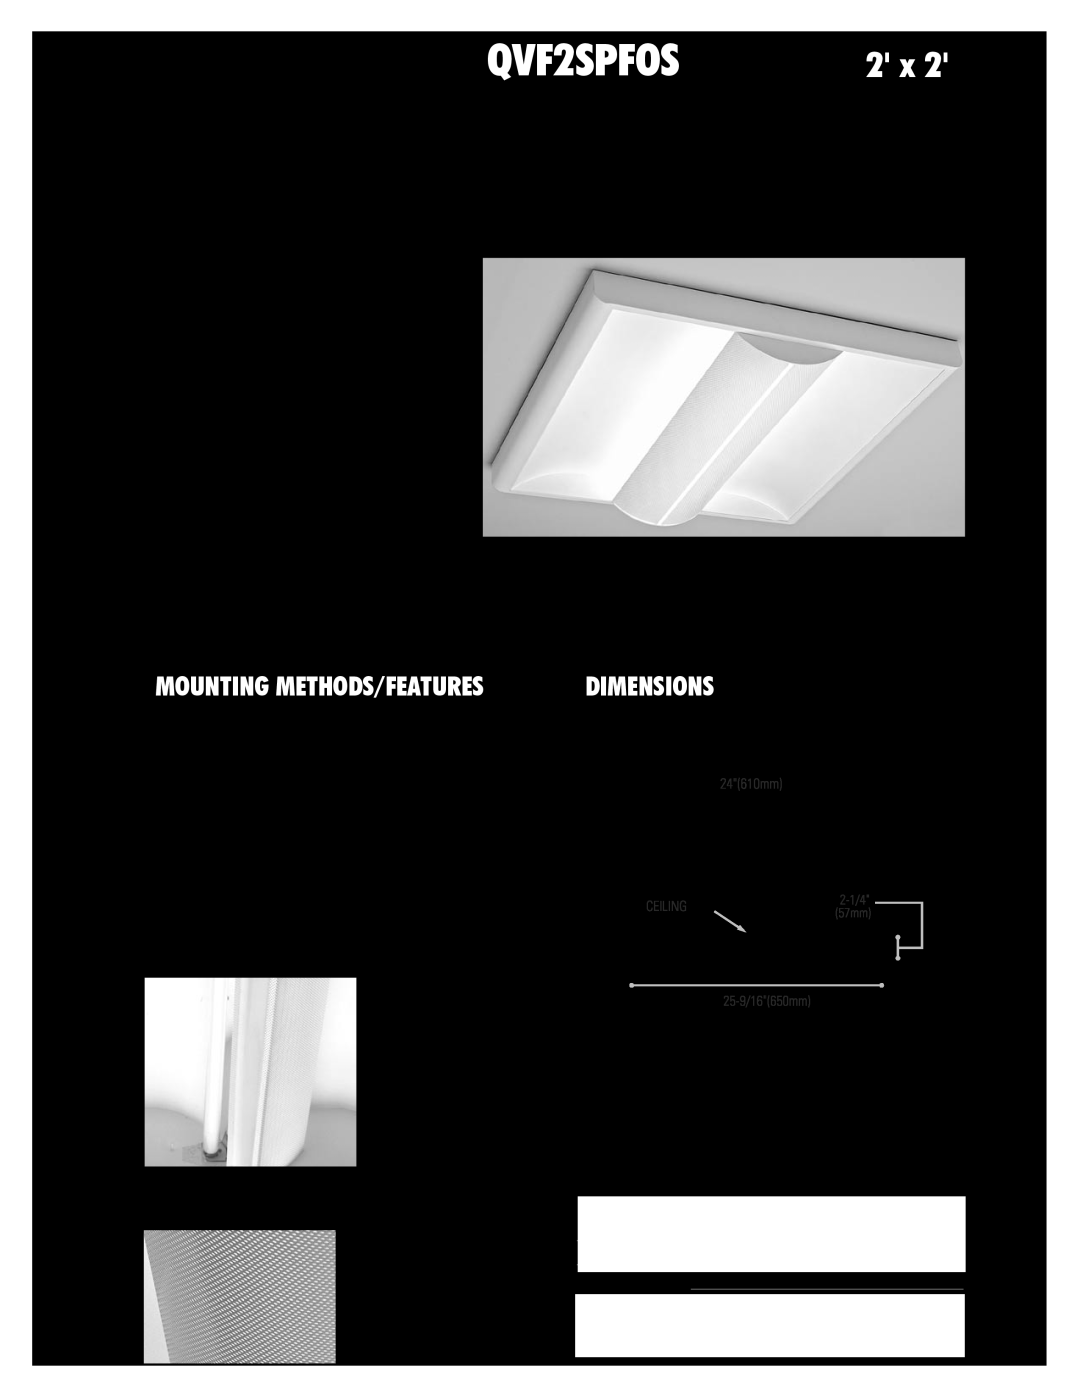 Lightolier QVF2SPFOS dimensions Alter Slim Surface, 2’ X 2’ SURFACE FLUORESCENT, Dimensions, Mounting Methods/Features 